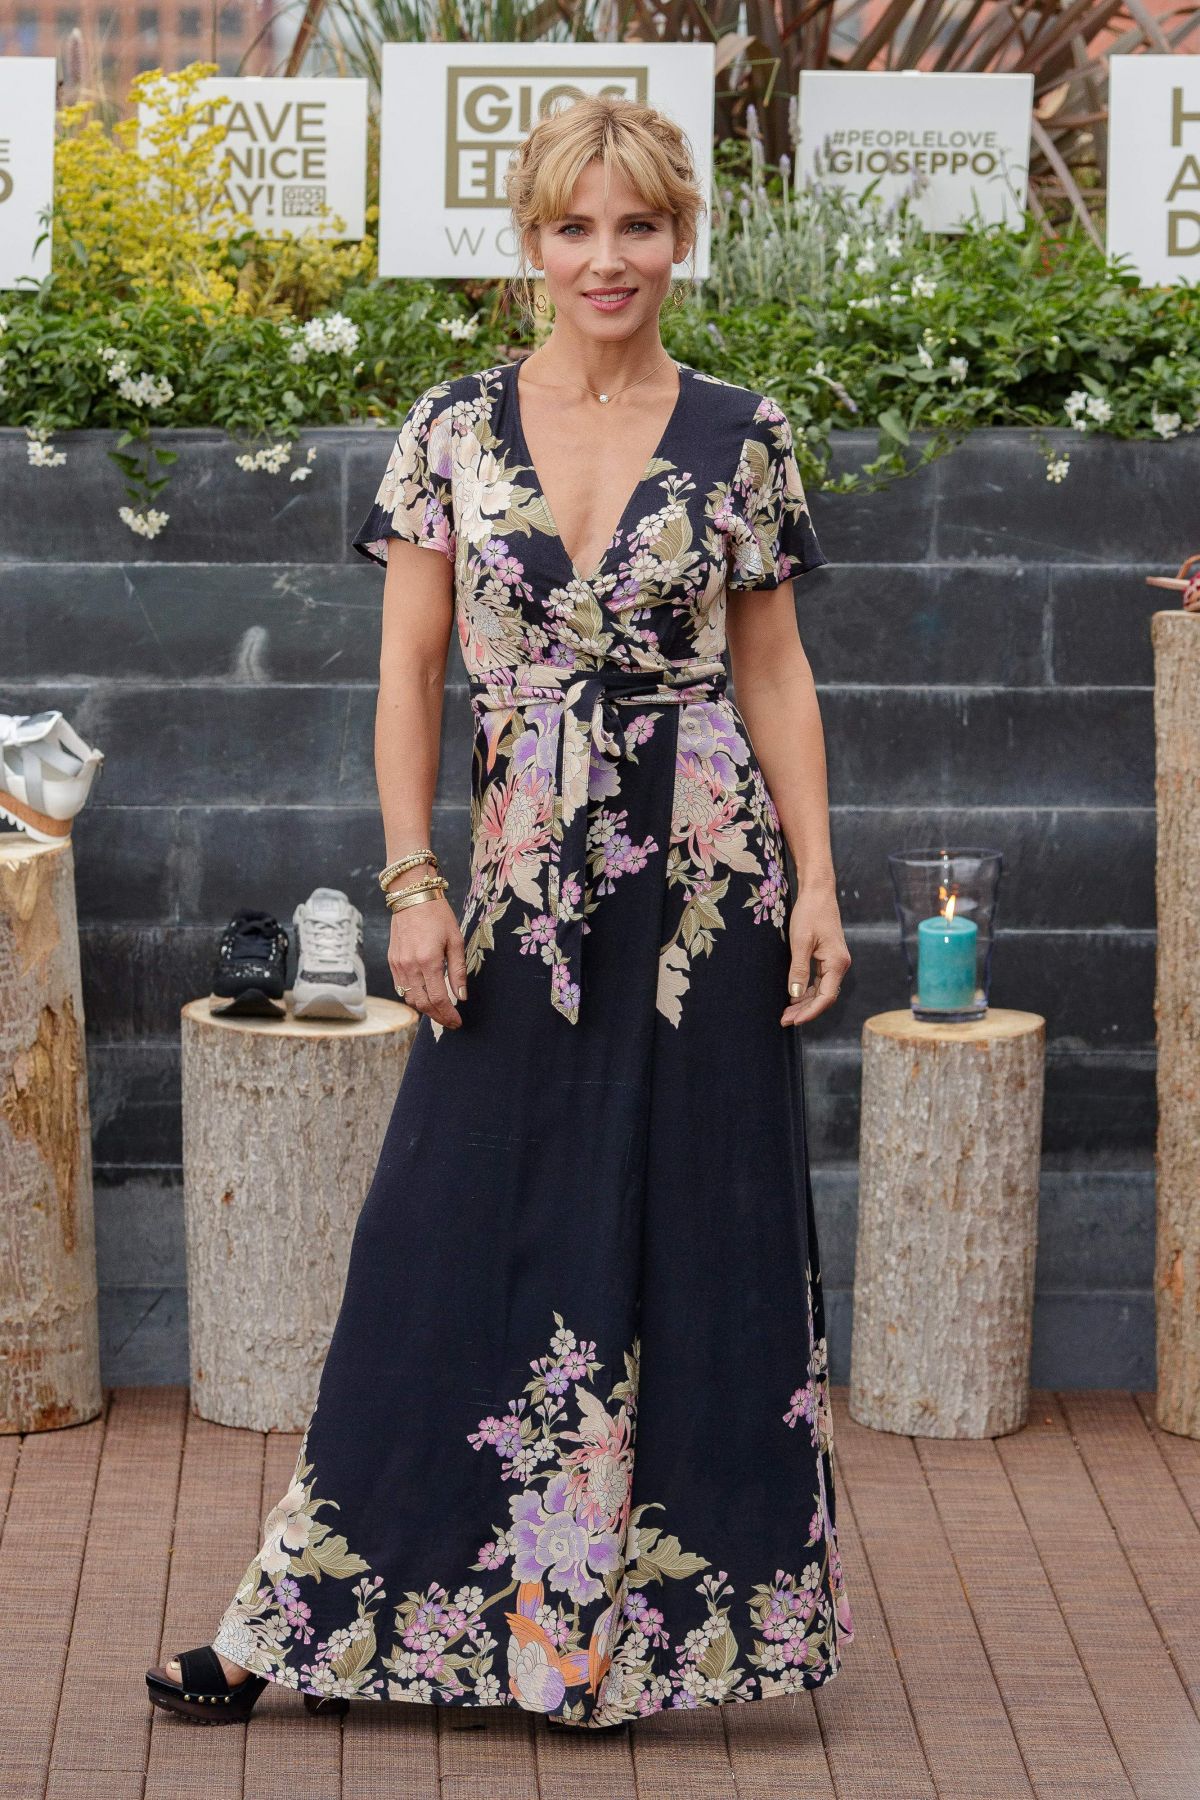 ELSA PATAKY at Gioseppo Woman Collection Photocall in 